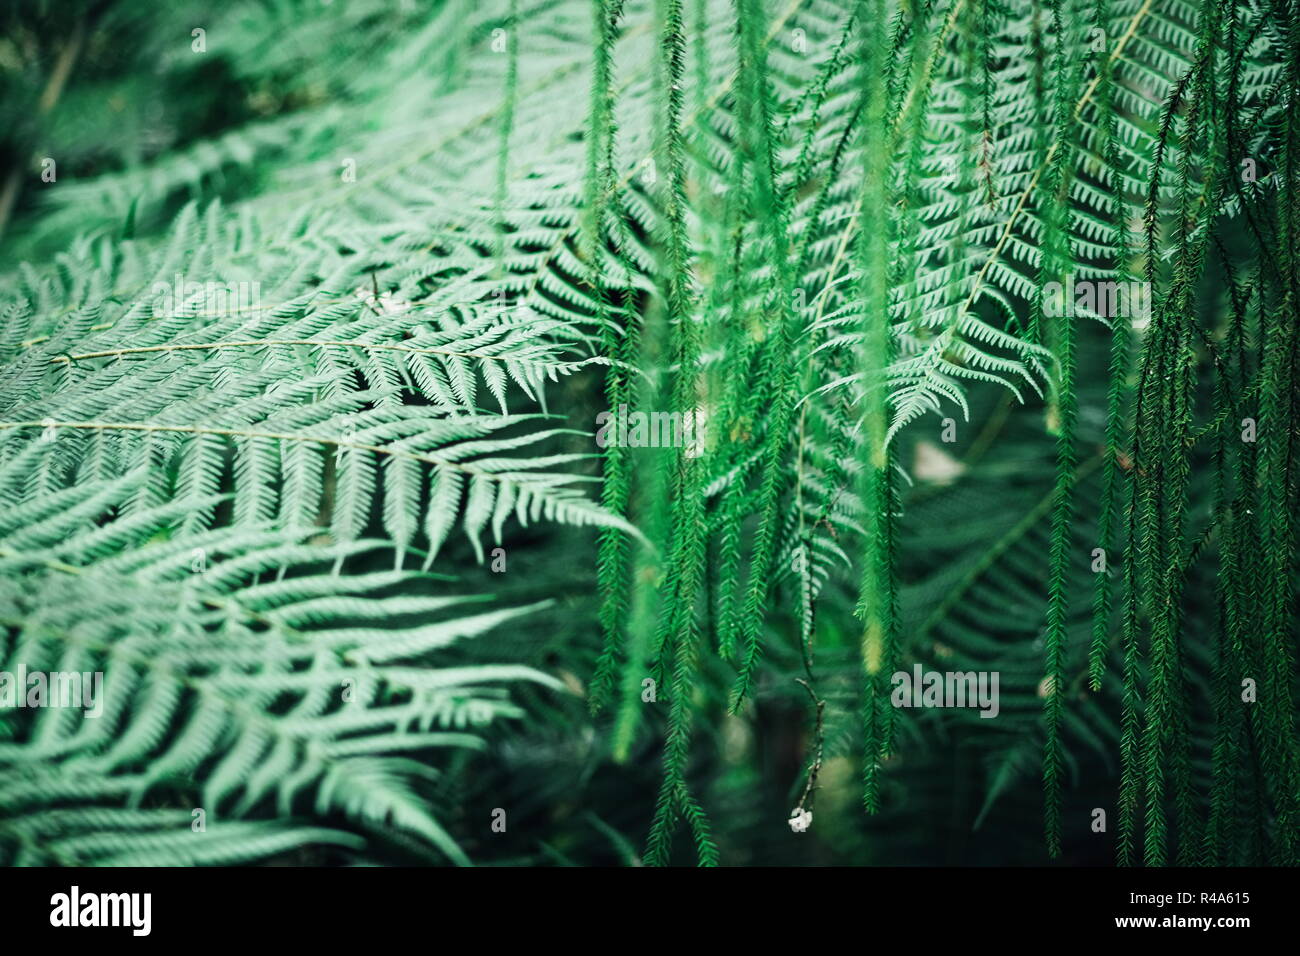 Close up landscape image of rimu and fern leaves both native to New Zealand. Stock Photo